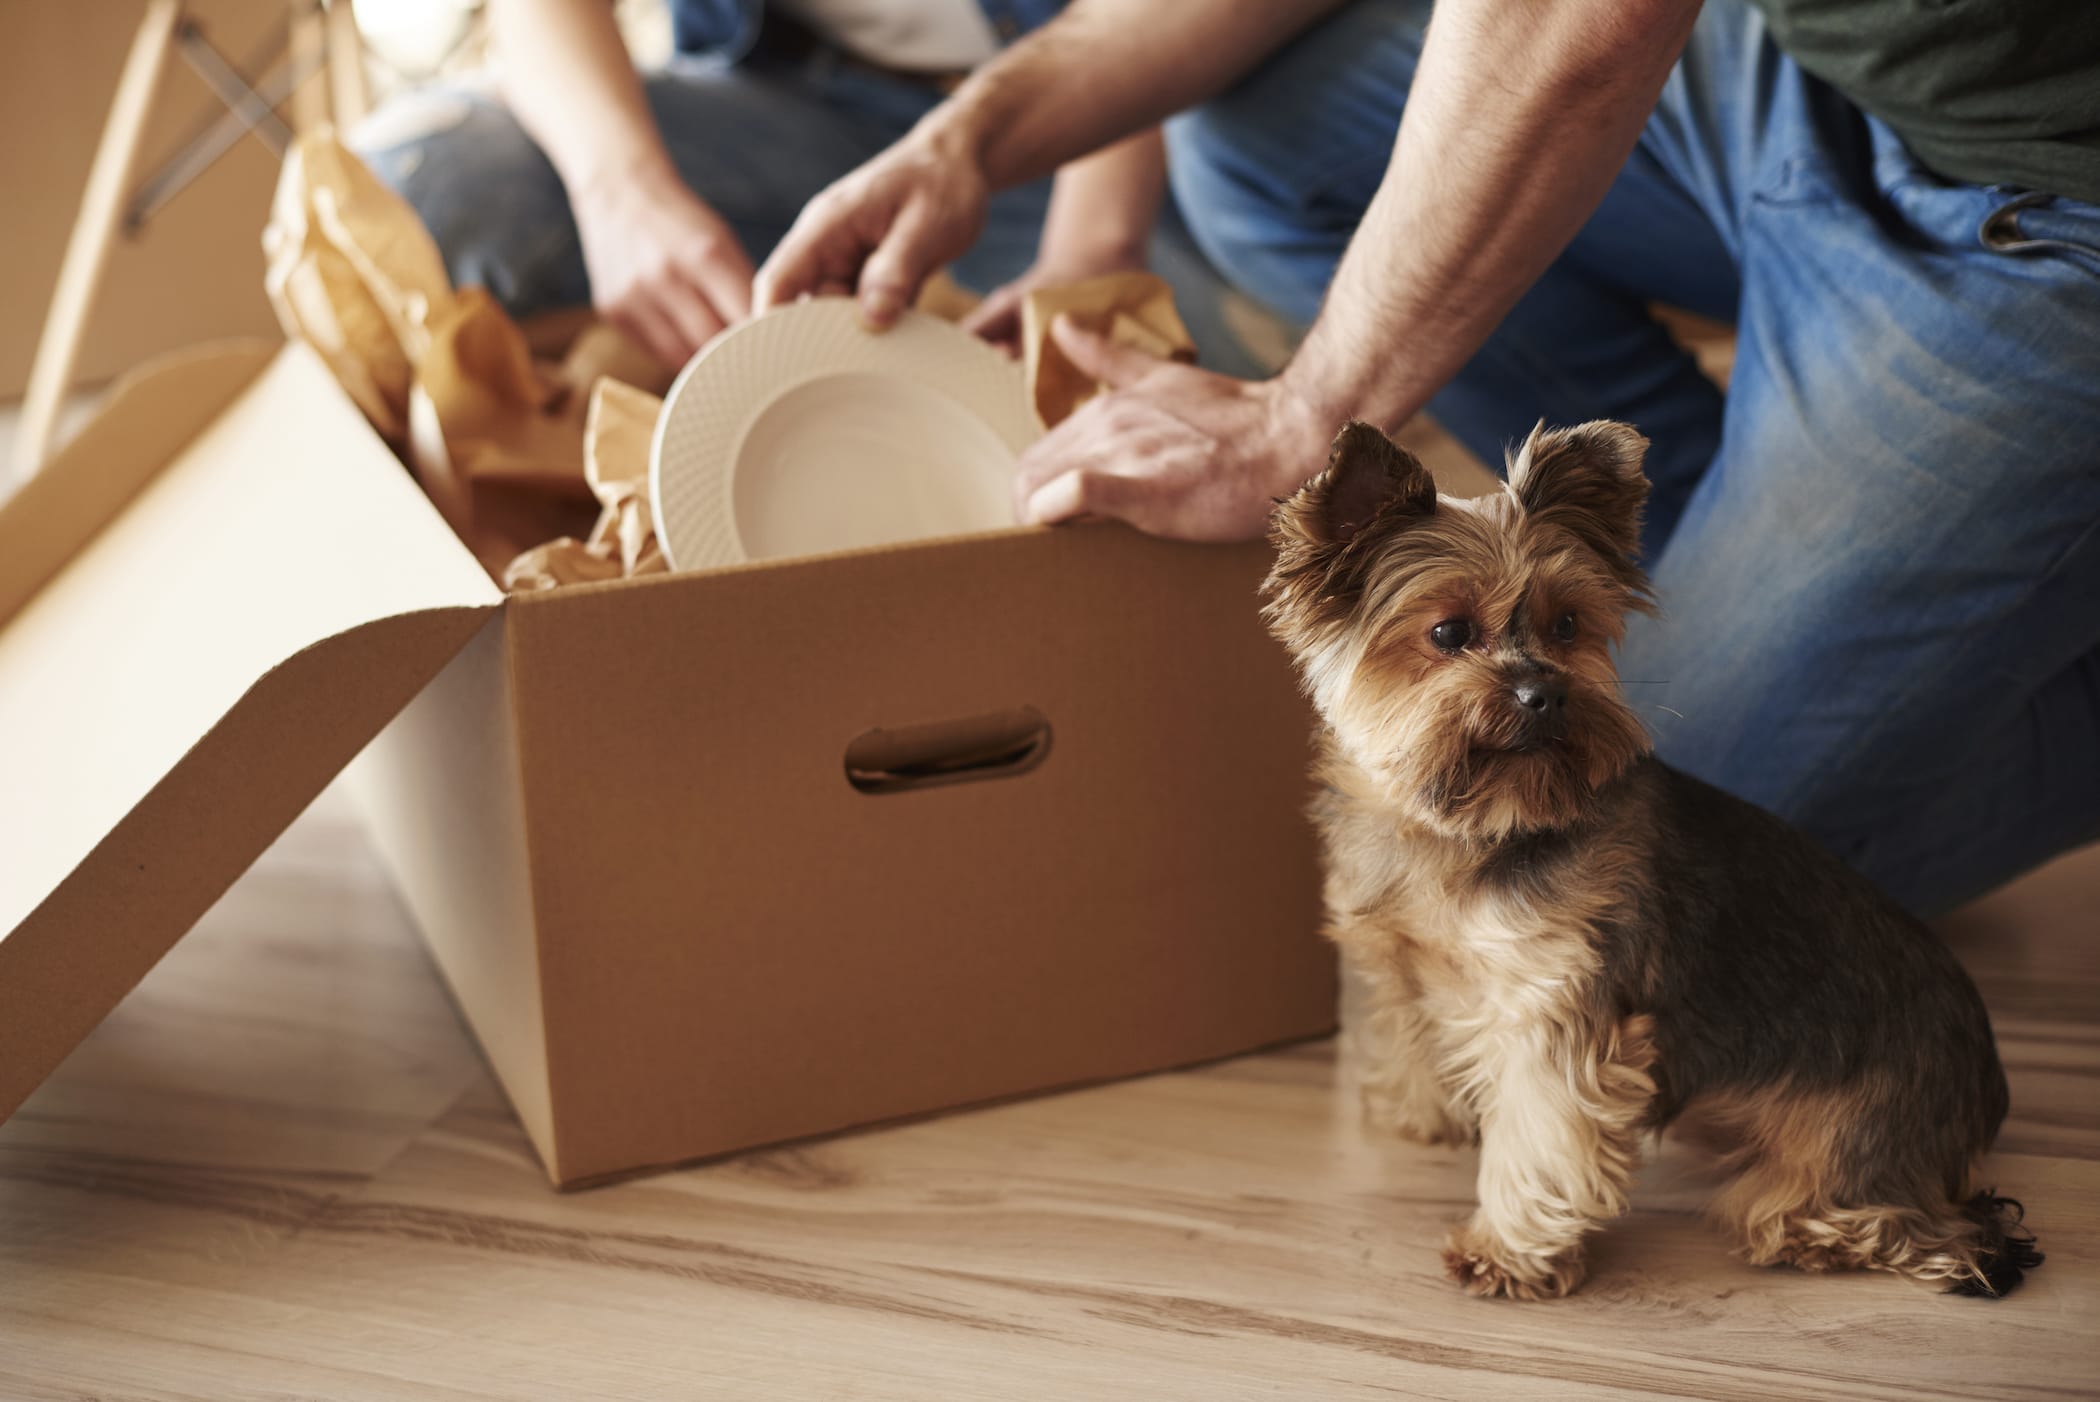 Here’s What to Pack First When Moving